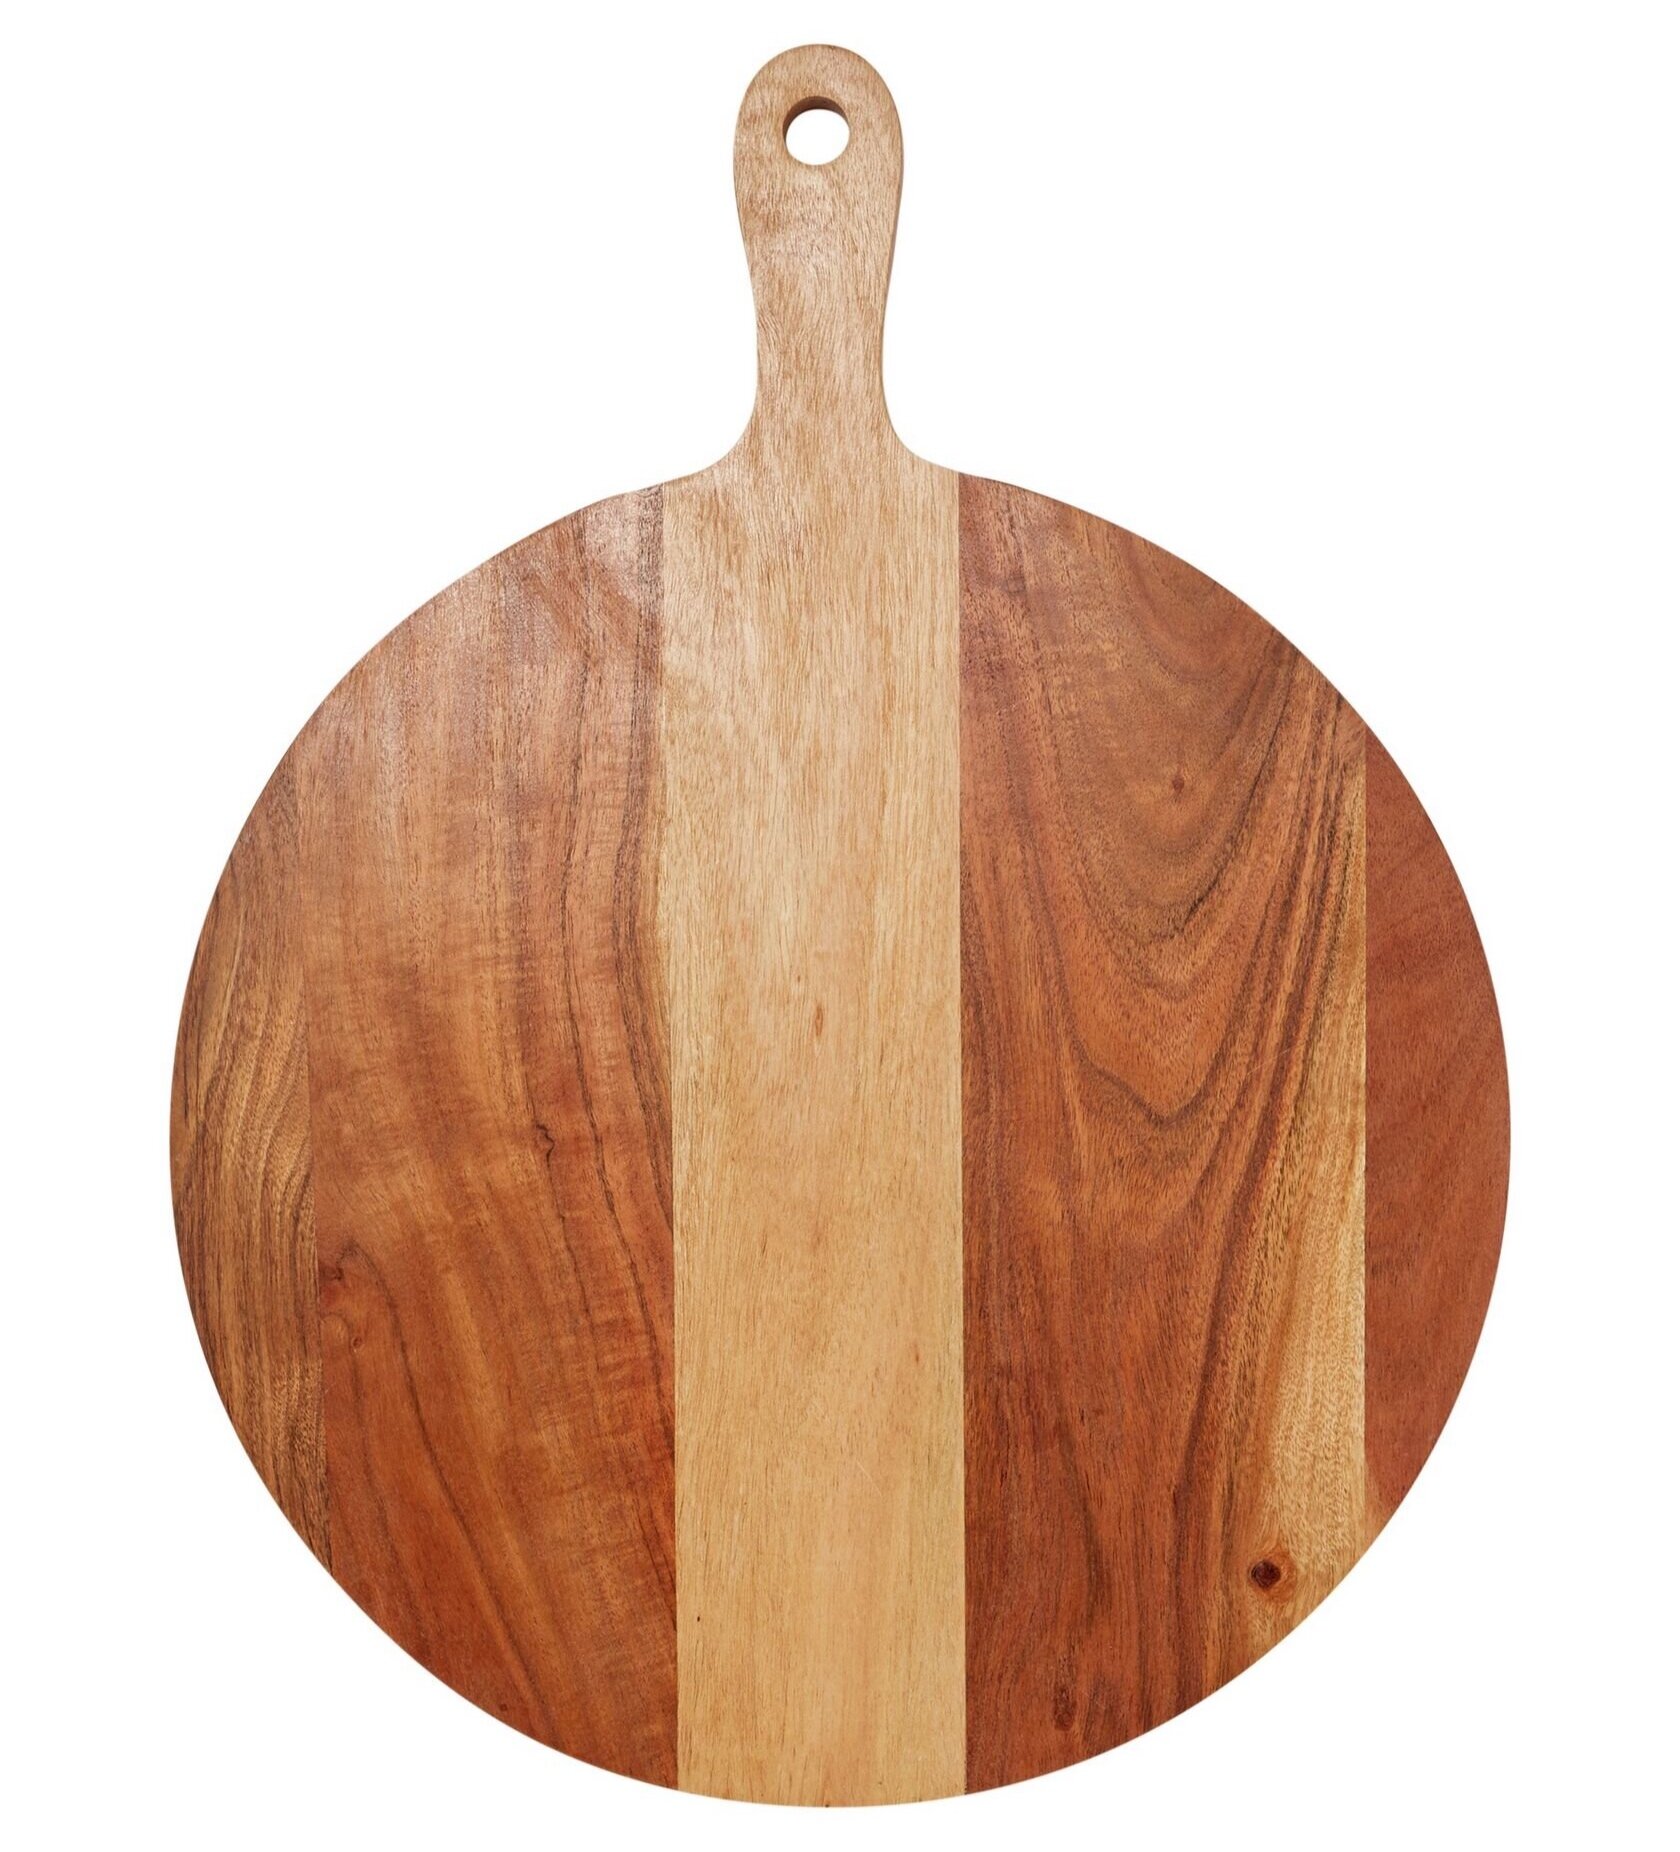 Serving board, £26, Truly.co.uk